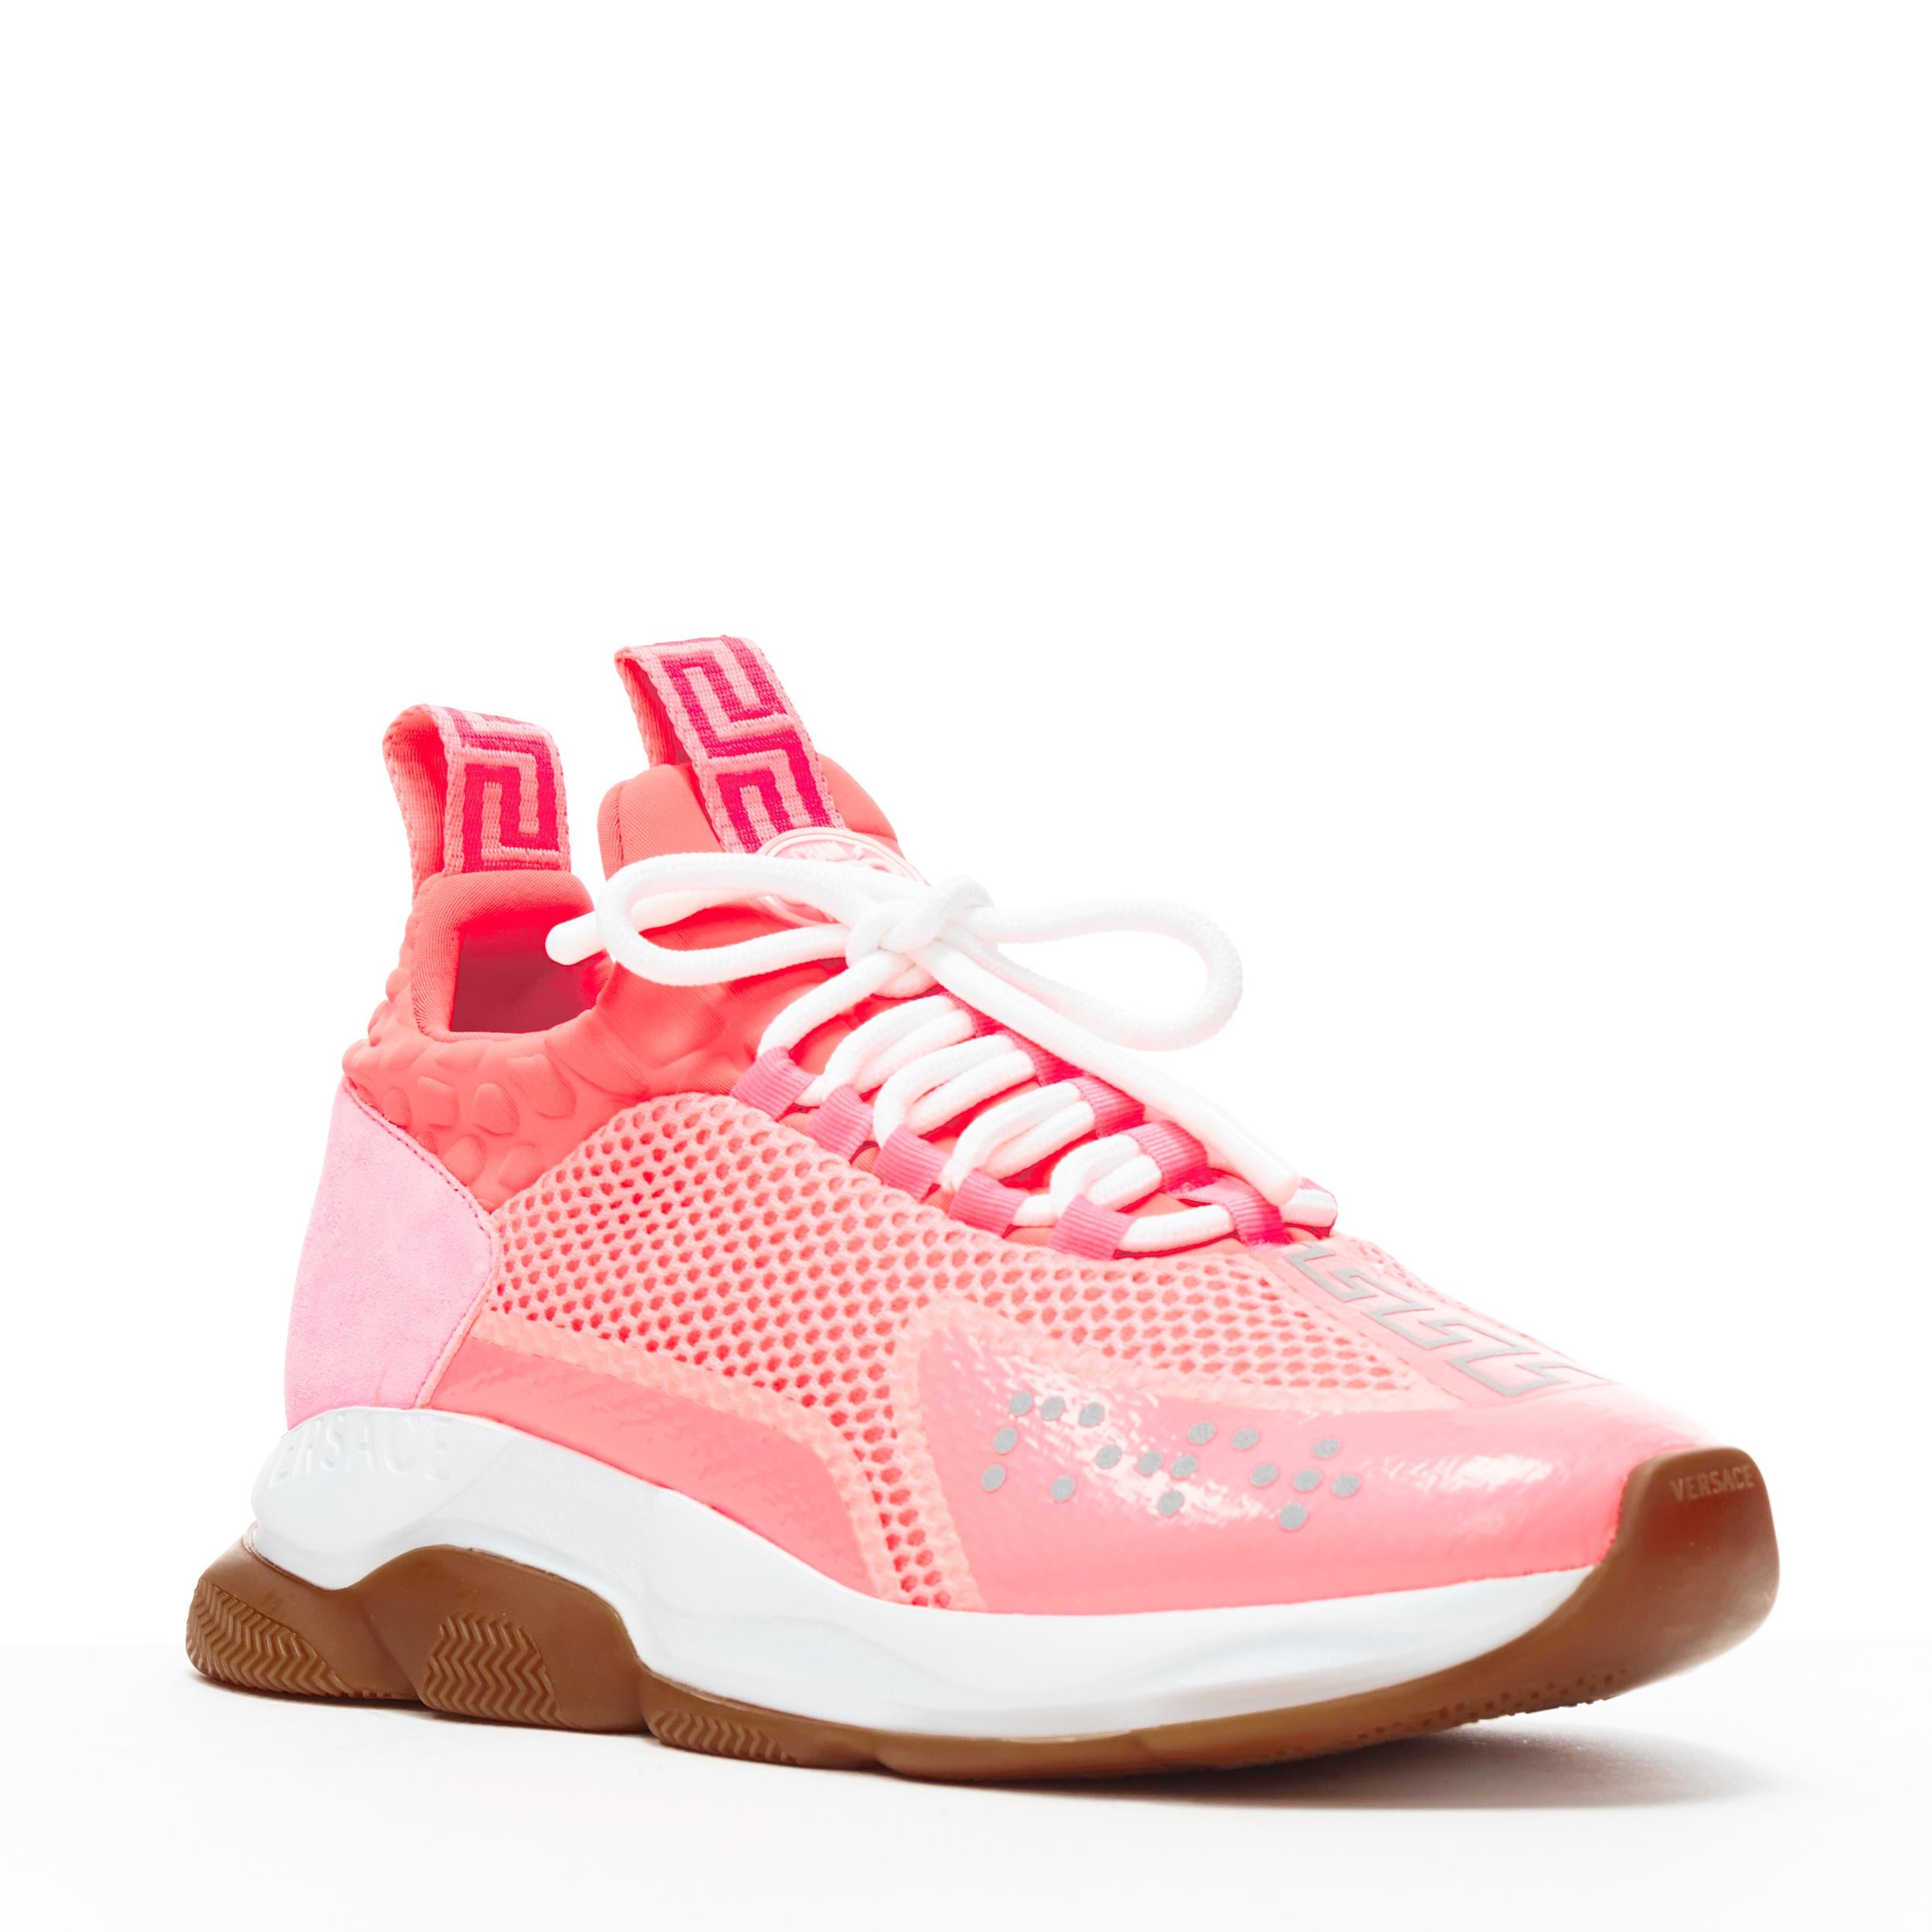 new VERSACE Cross Chainer fluorescent neon pink mesh low top sneaker EU41 US8 
Reference: TGAS/A06271 
Brand: Versace 
Designer: Salehe Bembury 
Model: Cross Chainer Neon Pink 
Material: Leather 
Color: Pink 
Pattern: Solid 
Closure: Lace up
Extra